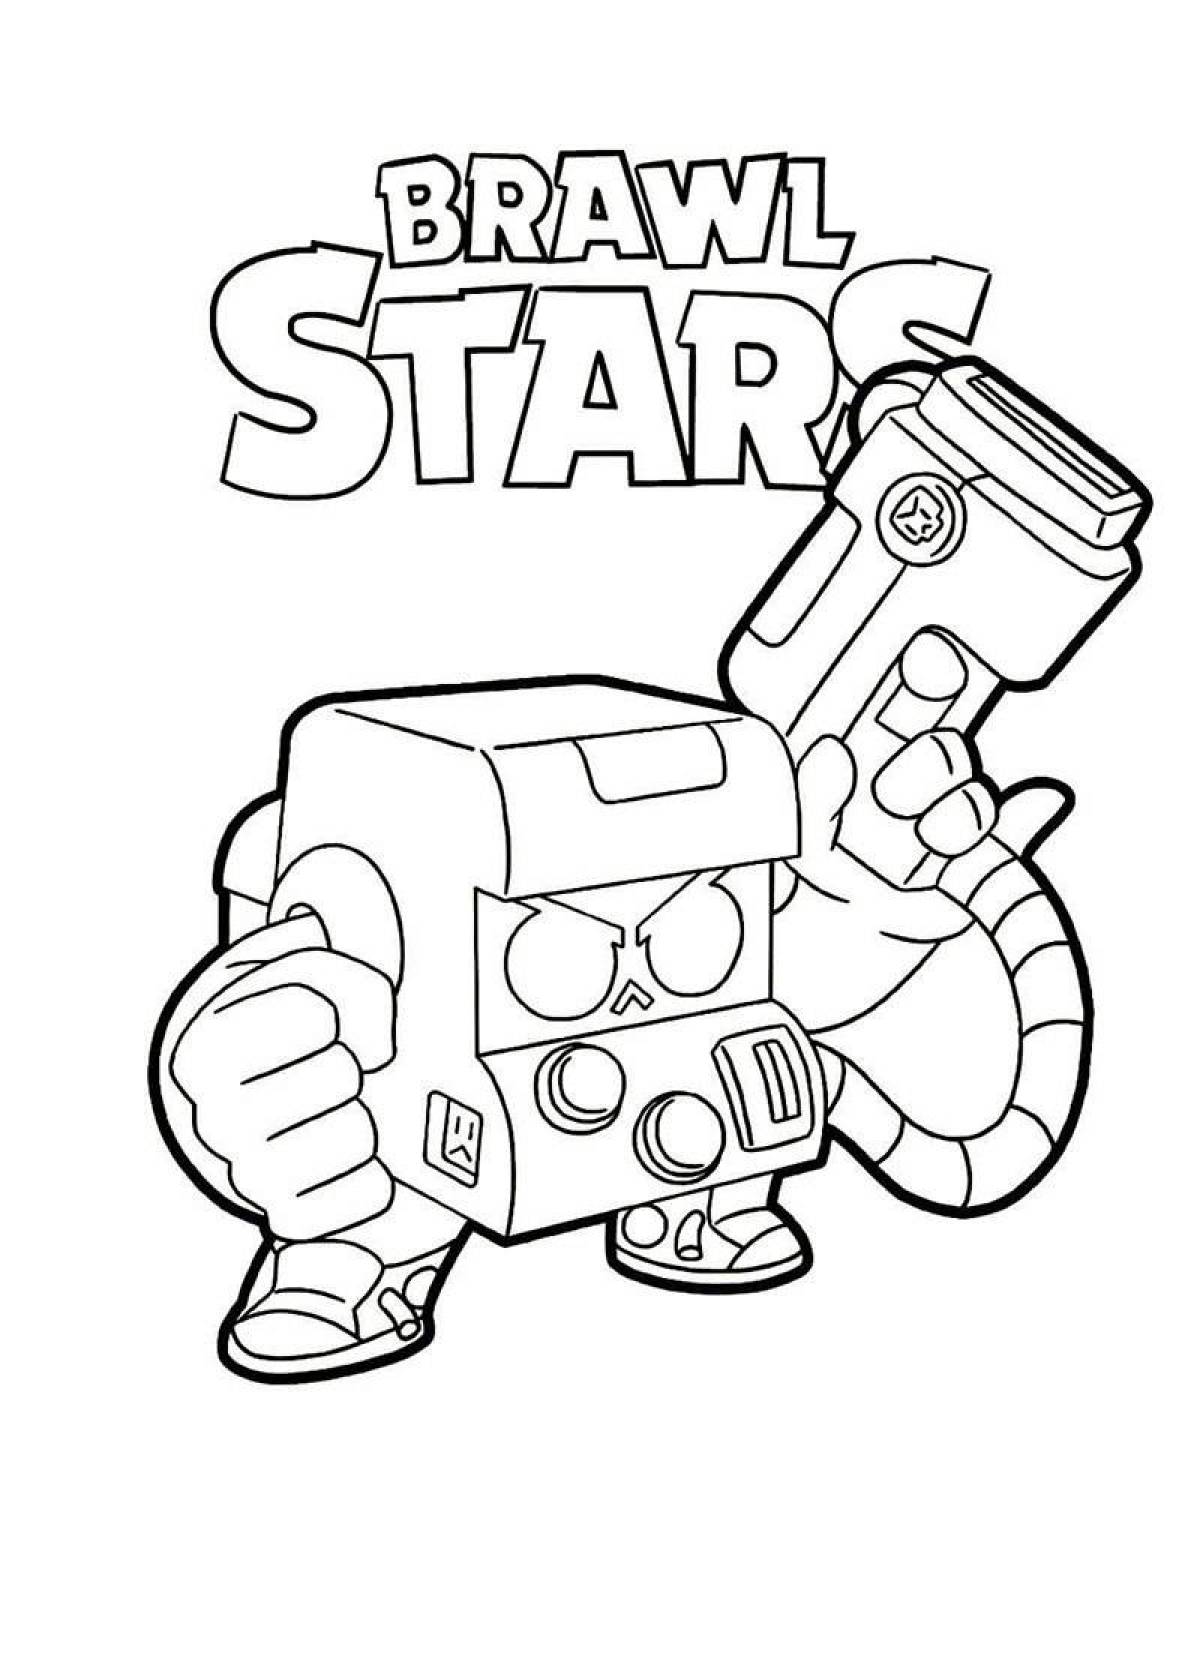 Outstanding Buster Bravo Stars coloring page